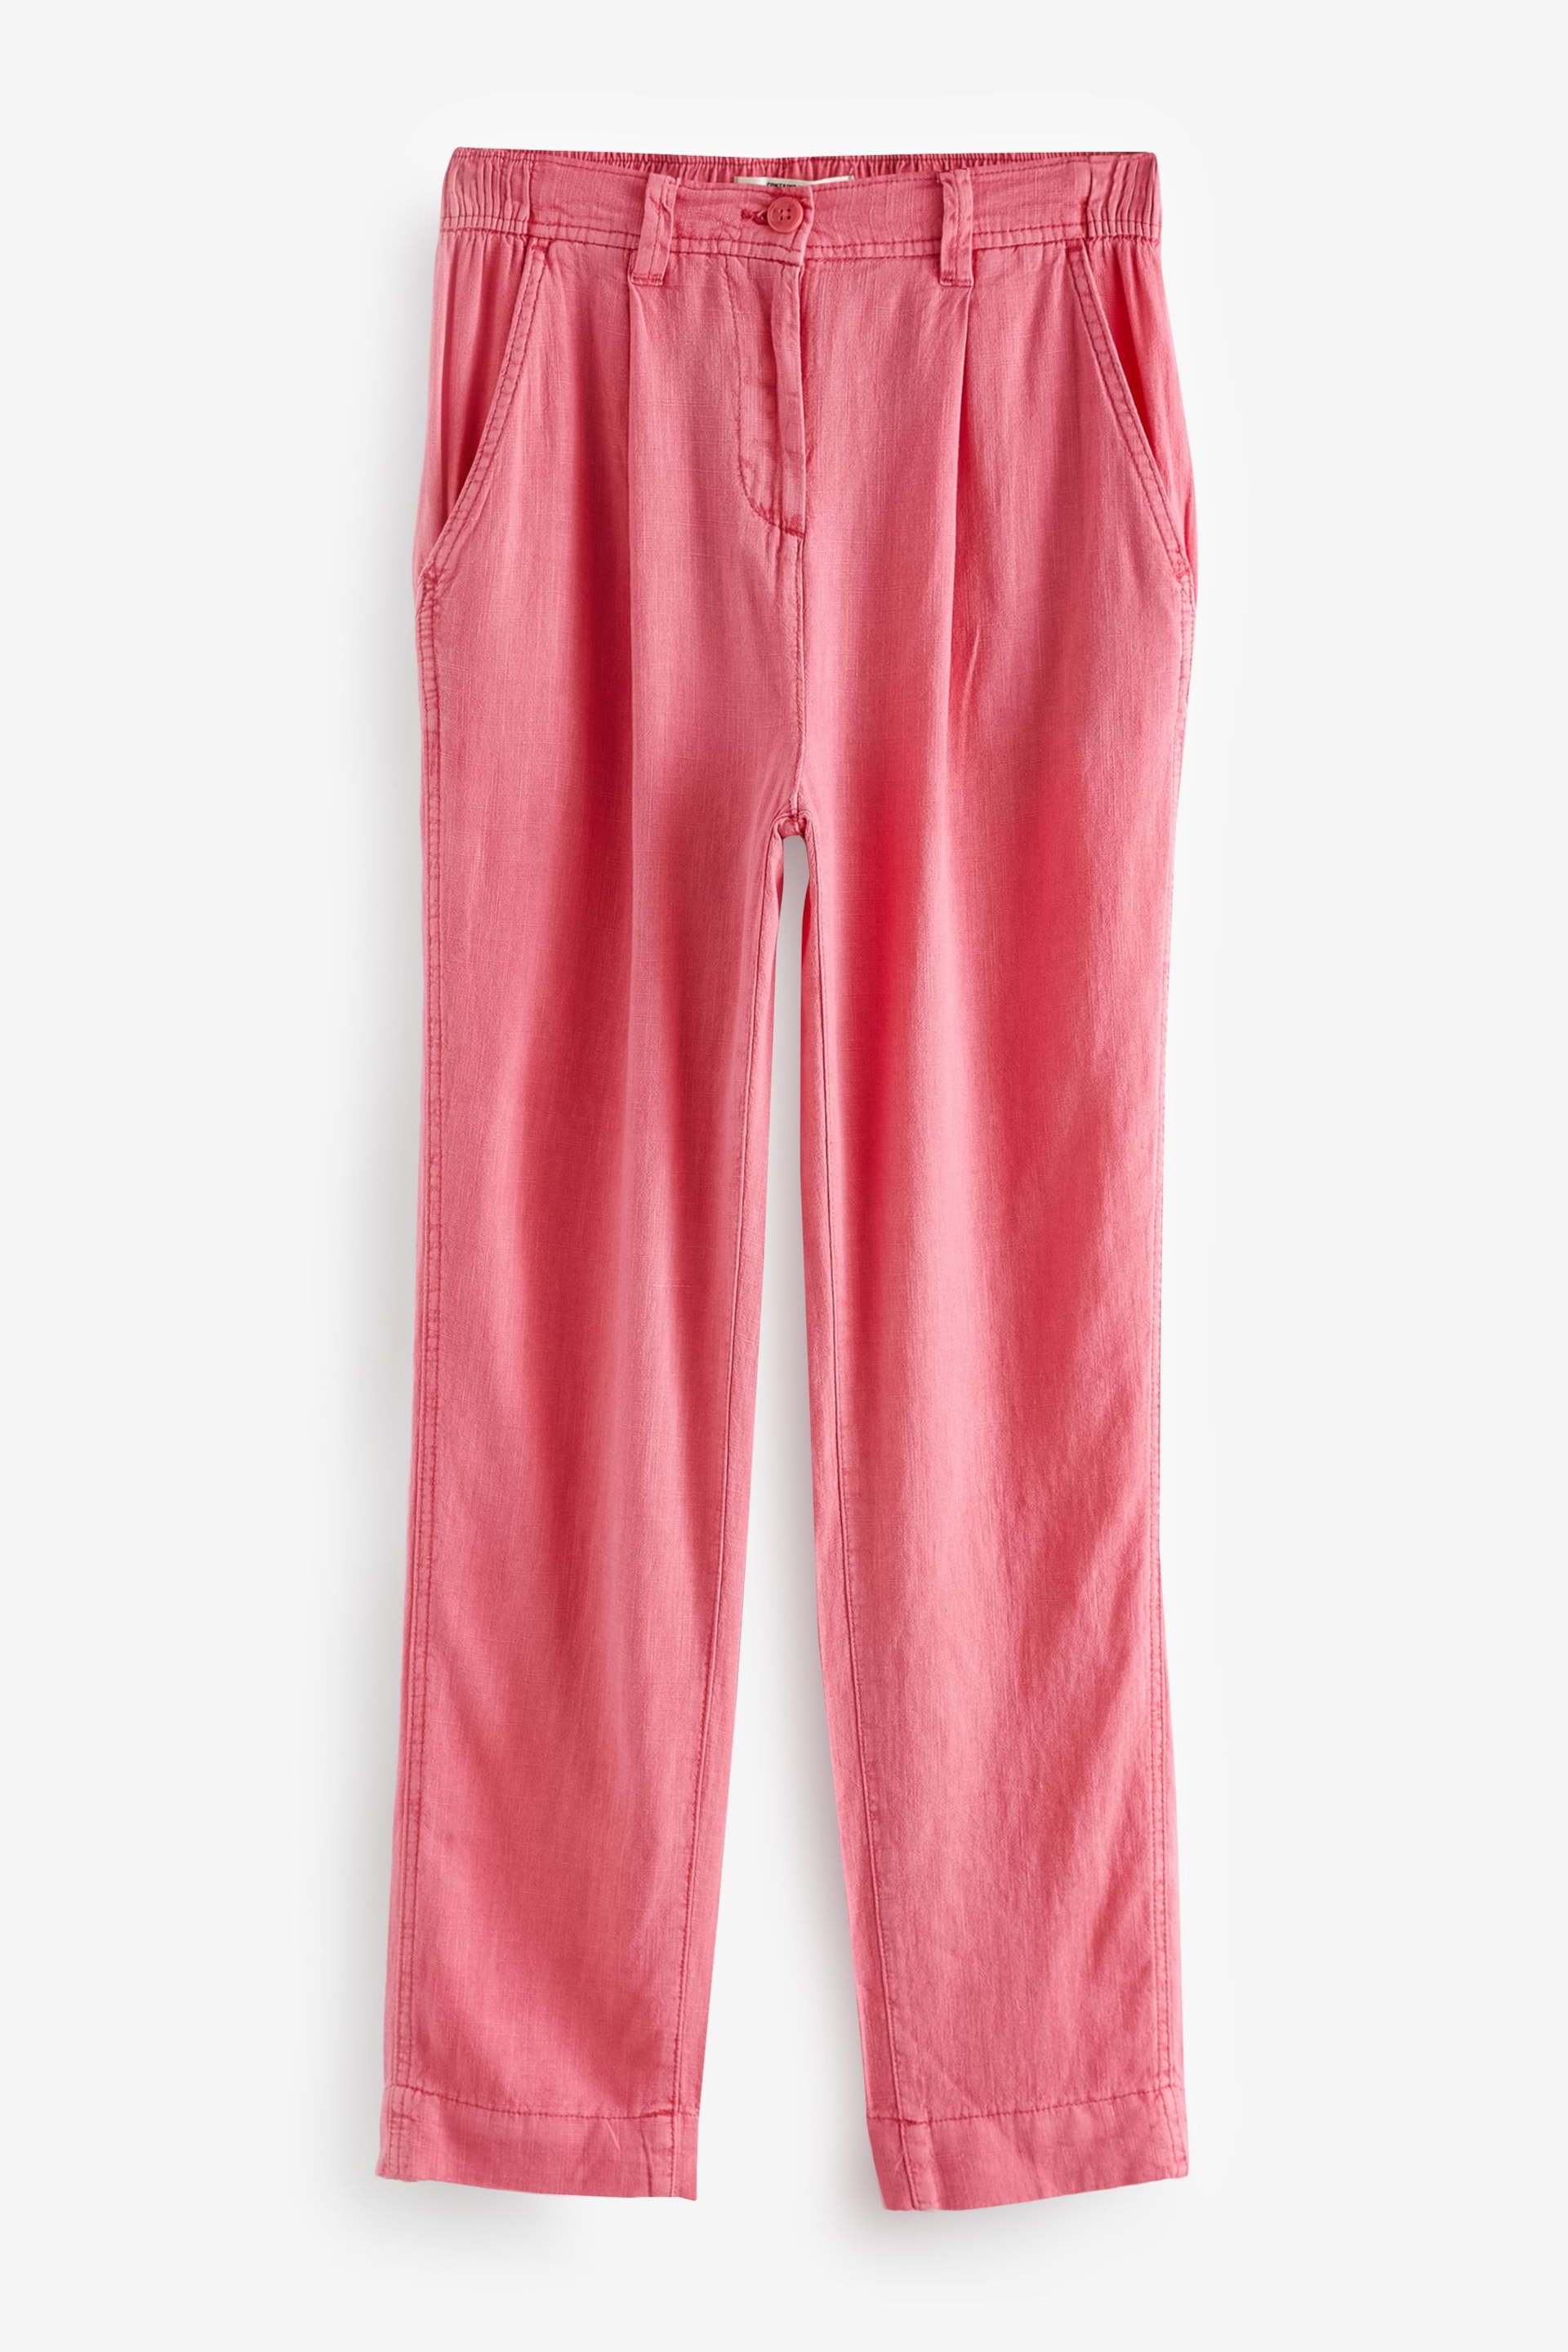 Pink Linen Blend Taper Trousers - Image 6 of 7